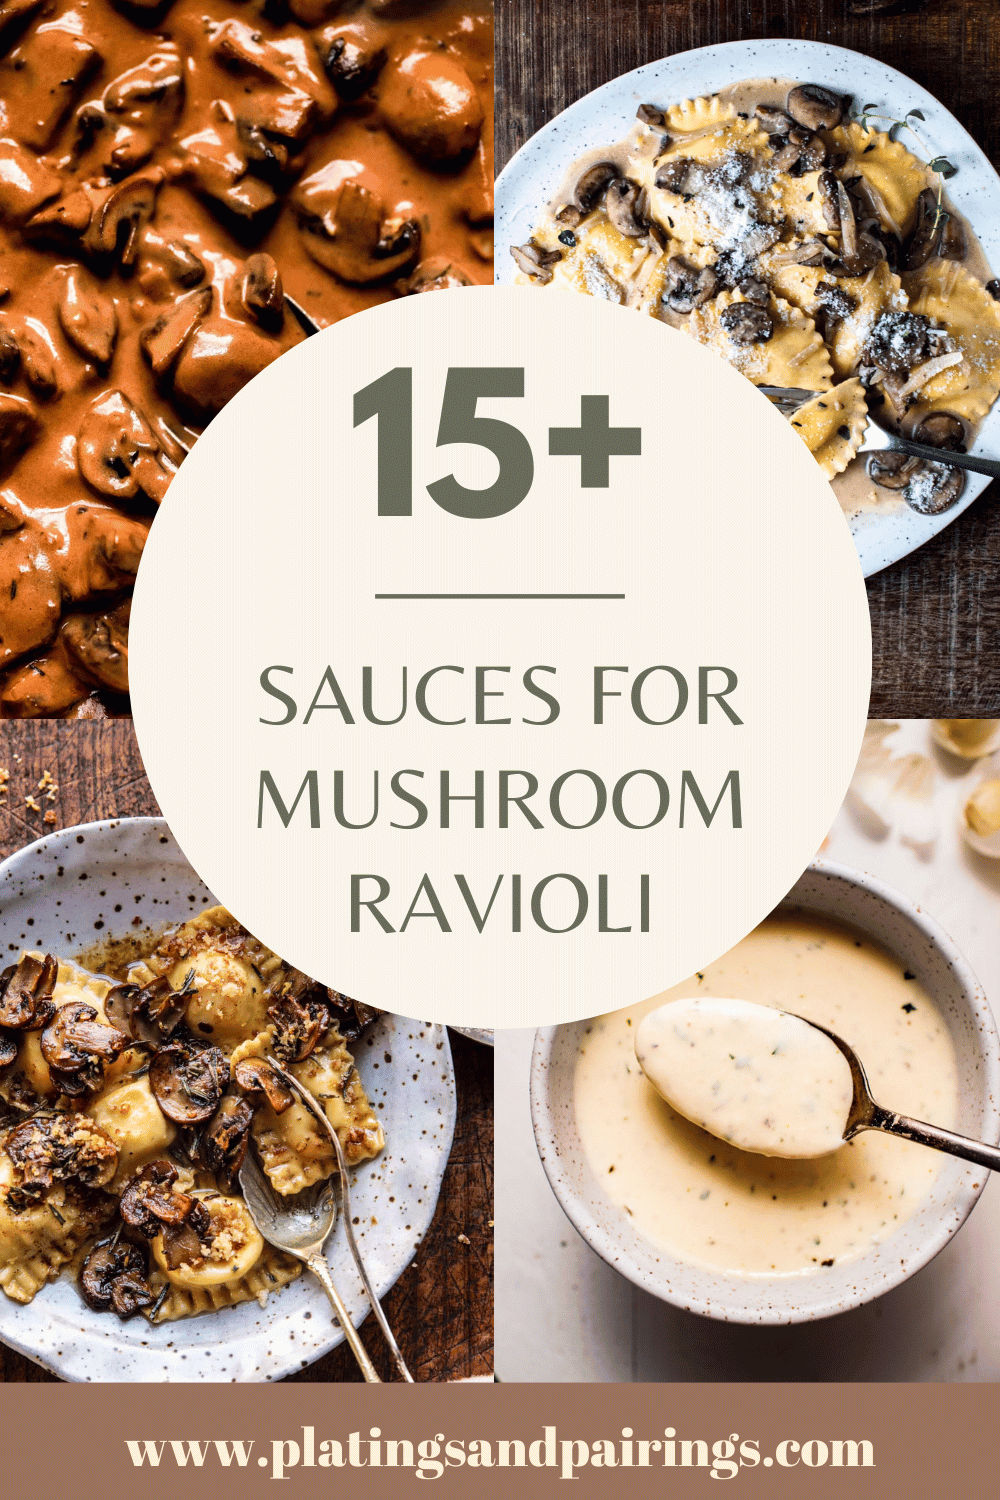 Collage of sauces for mushroom ravioli with text overlay.